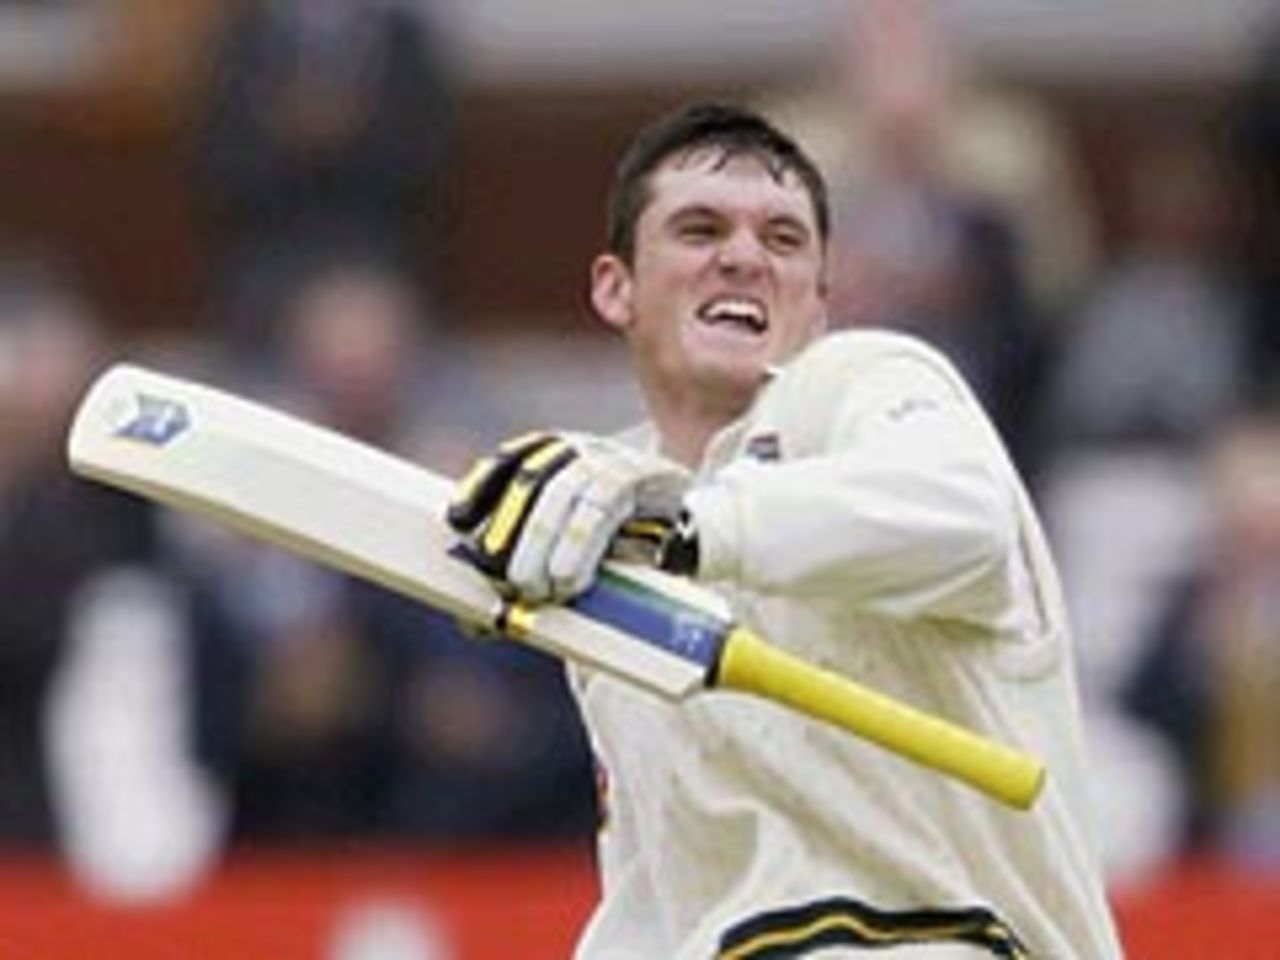 Graeme Smith celebrates his second double-century in consecutive matches as South Africa grind England into the dust at Lord's